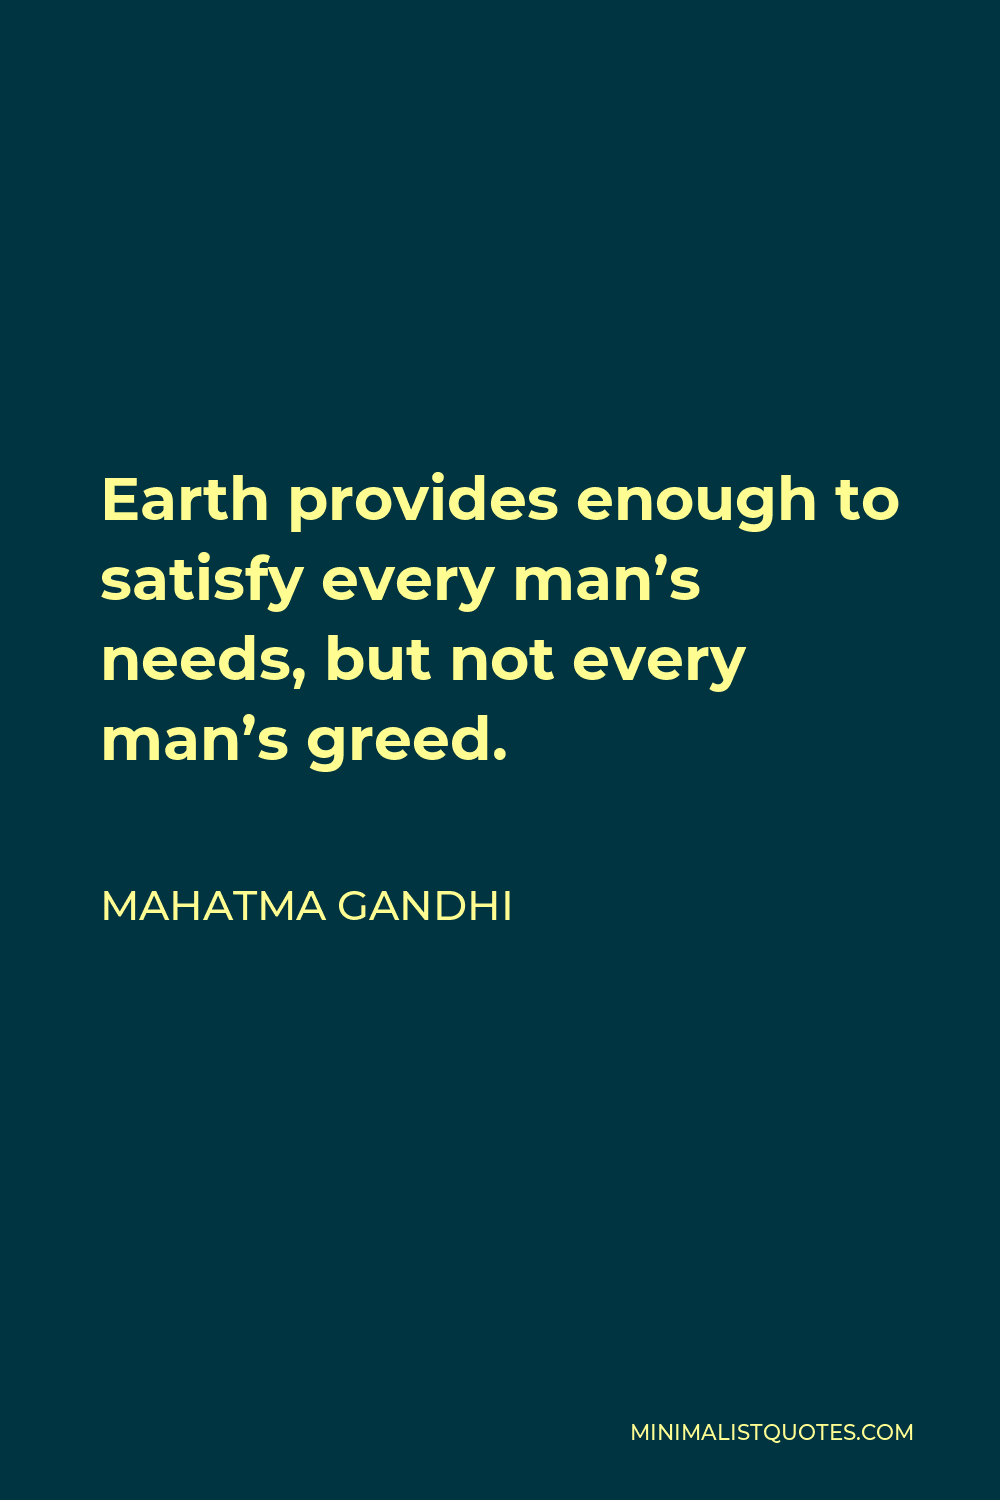 Mahatma Gandhi Quote - Earth provides enough to satisfy every man’s needs, but not every man’s greed.